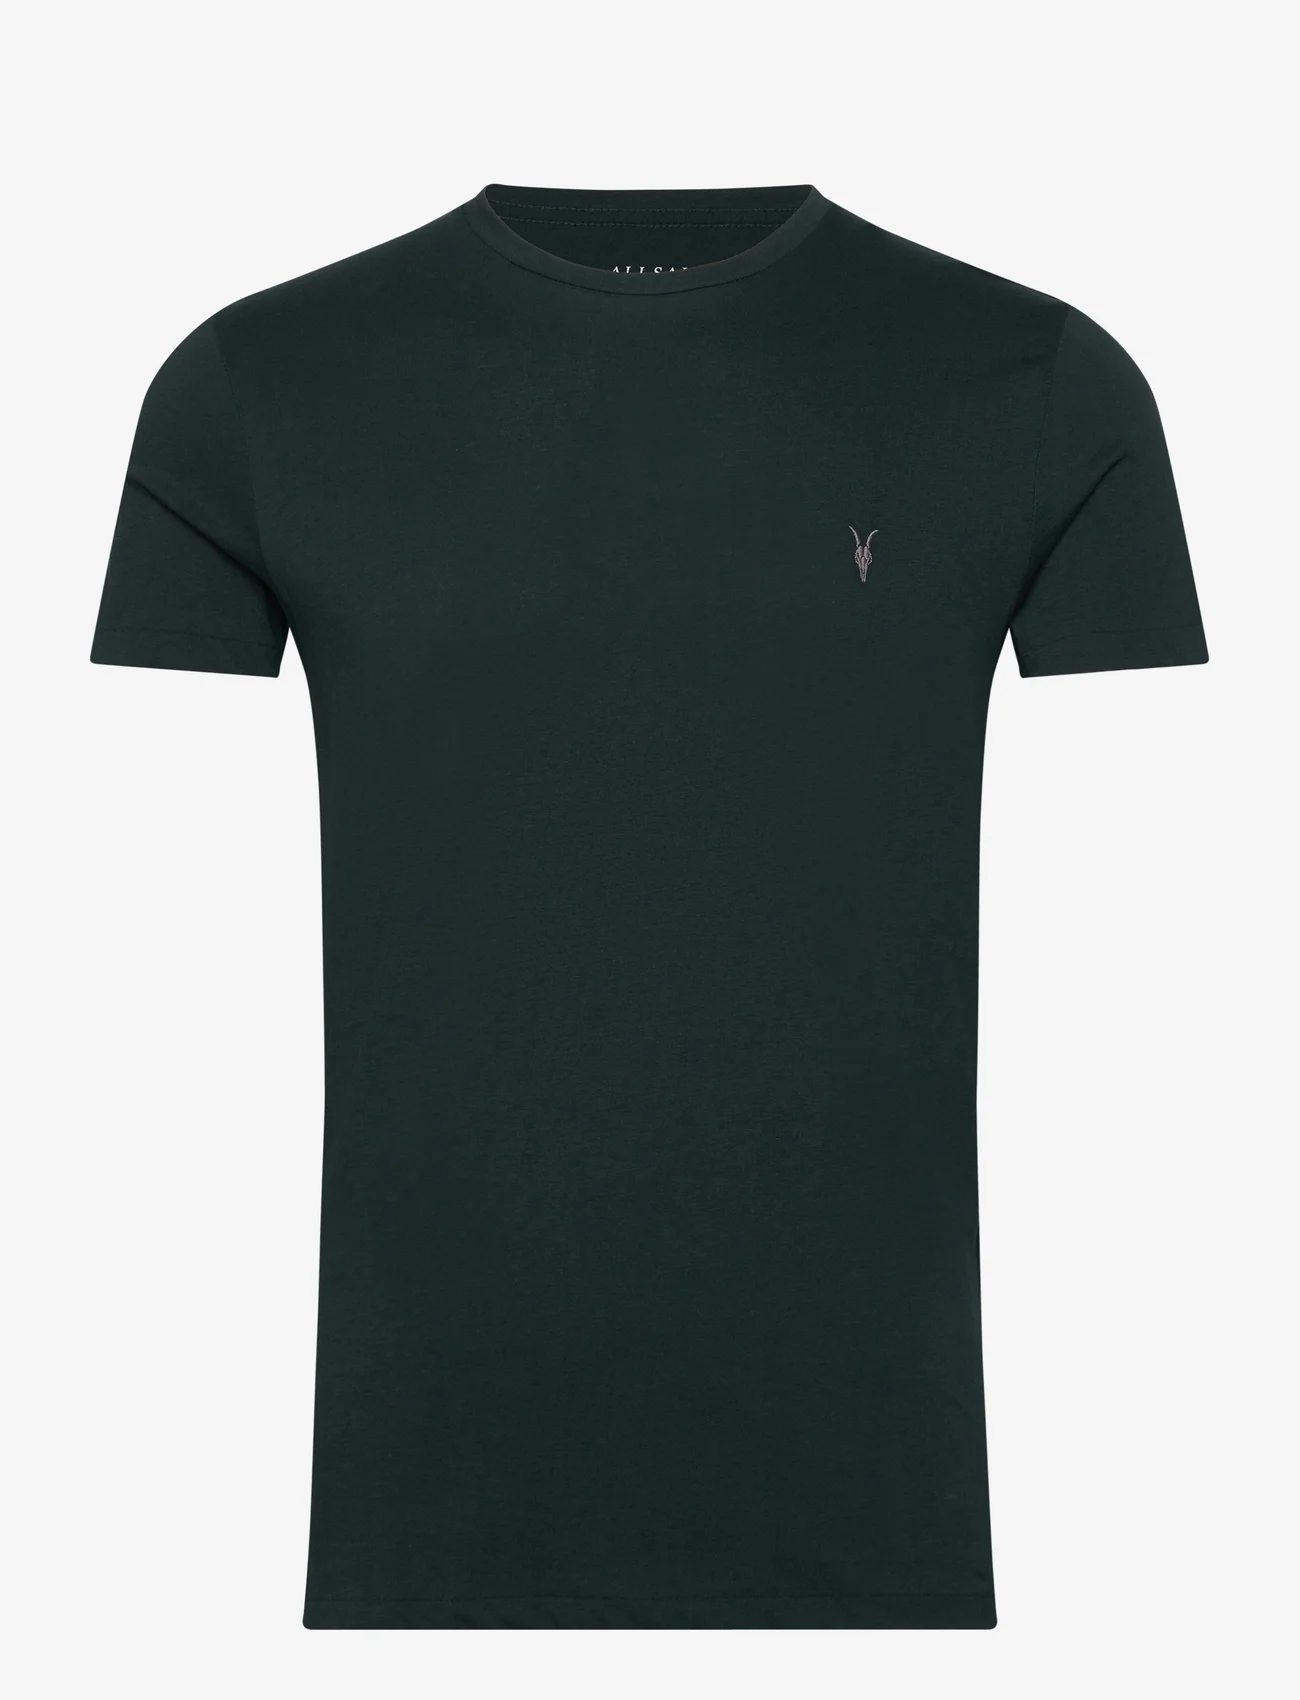 AllSaints - TONIC SS CREW - lowest prices - racing green - 0